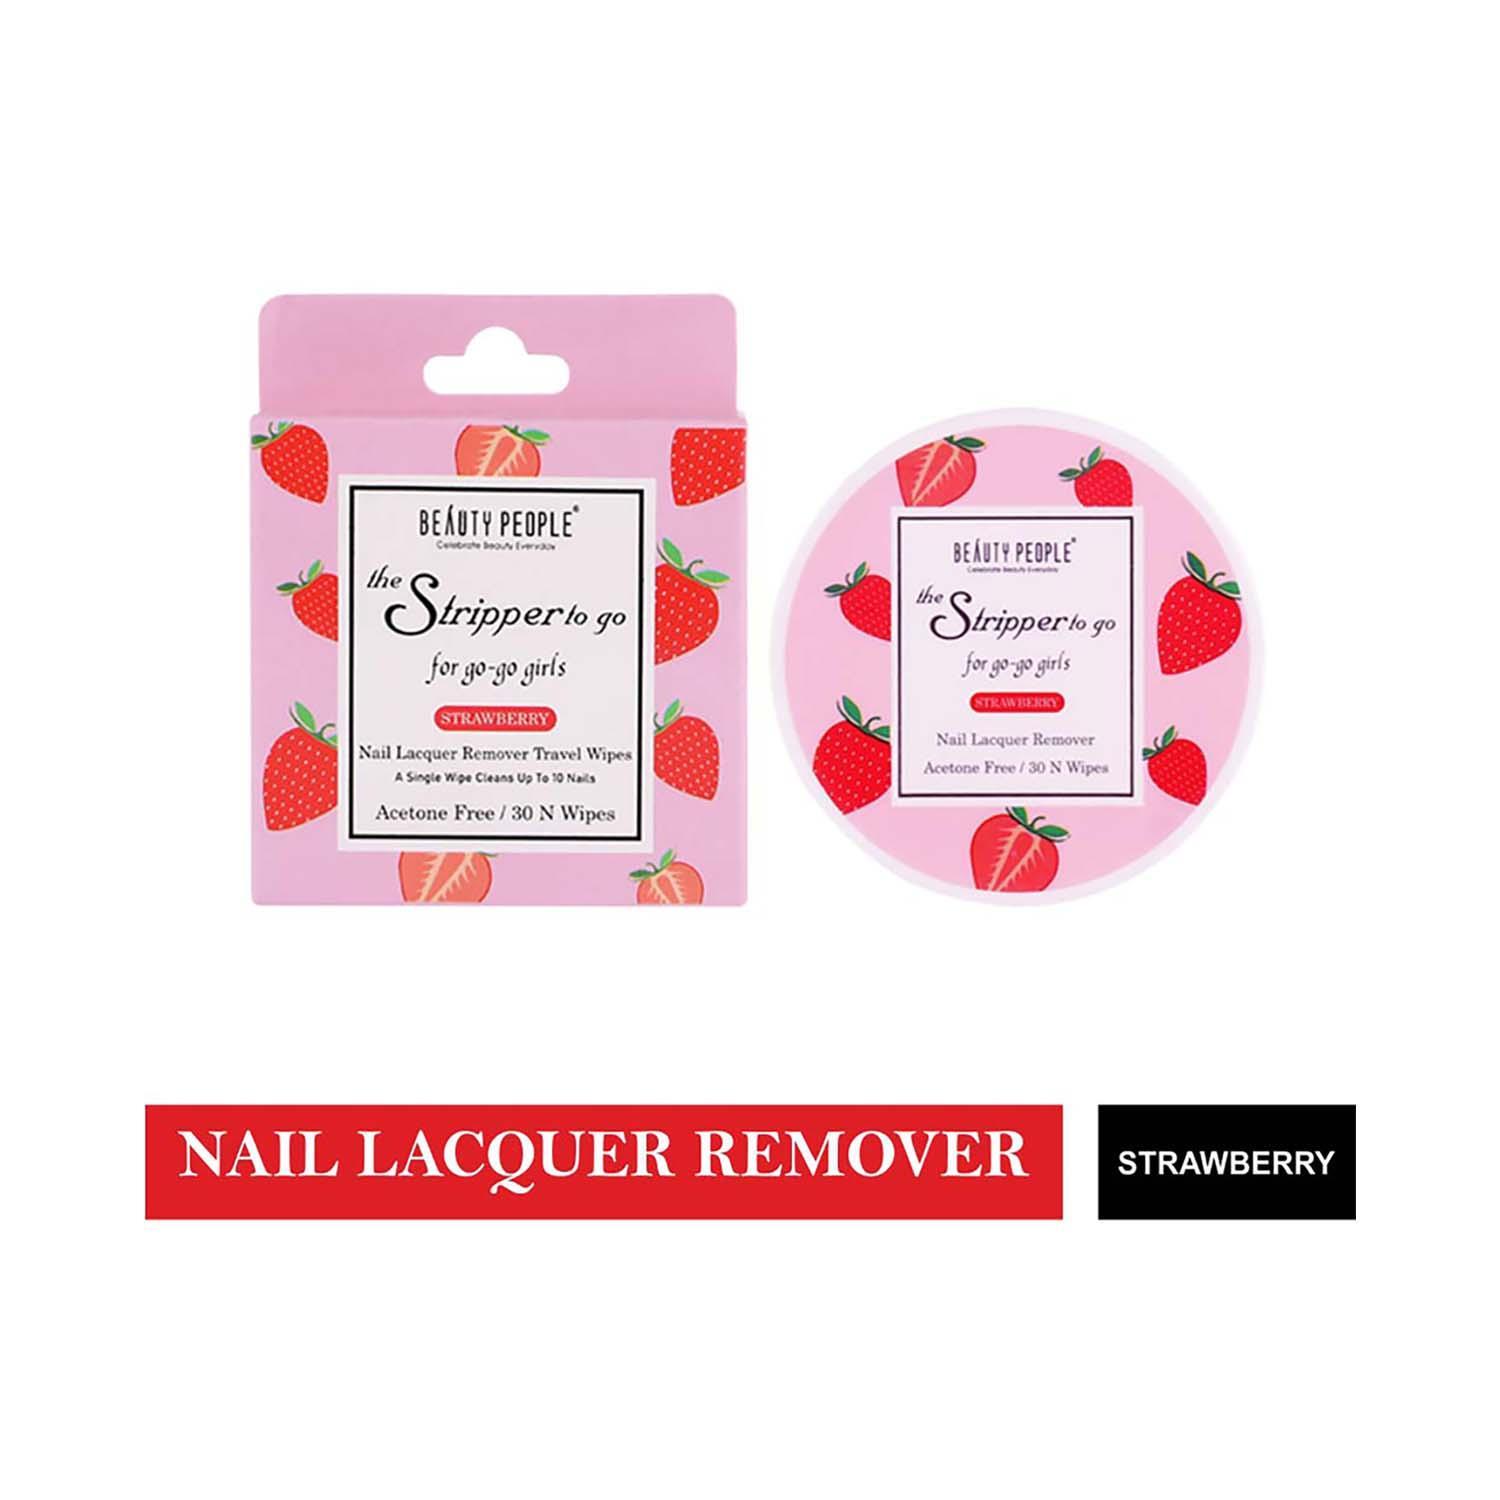 beauty people the stripper to the go nail polish remover travel pads - strawberry (30pcs)